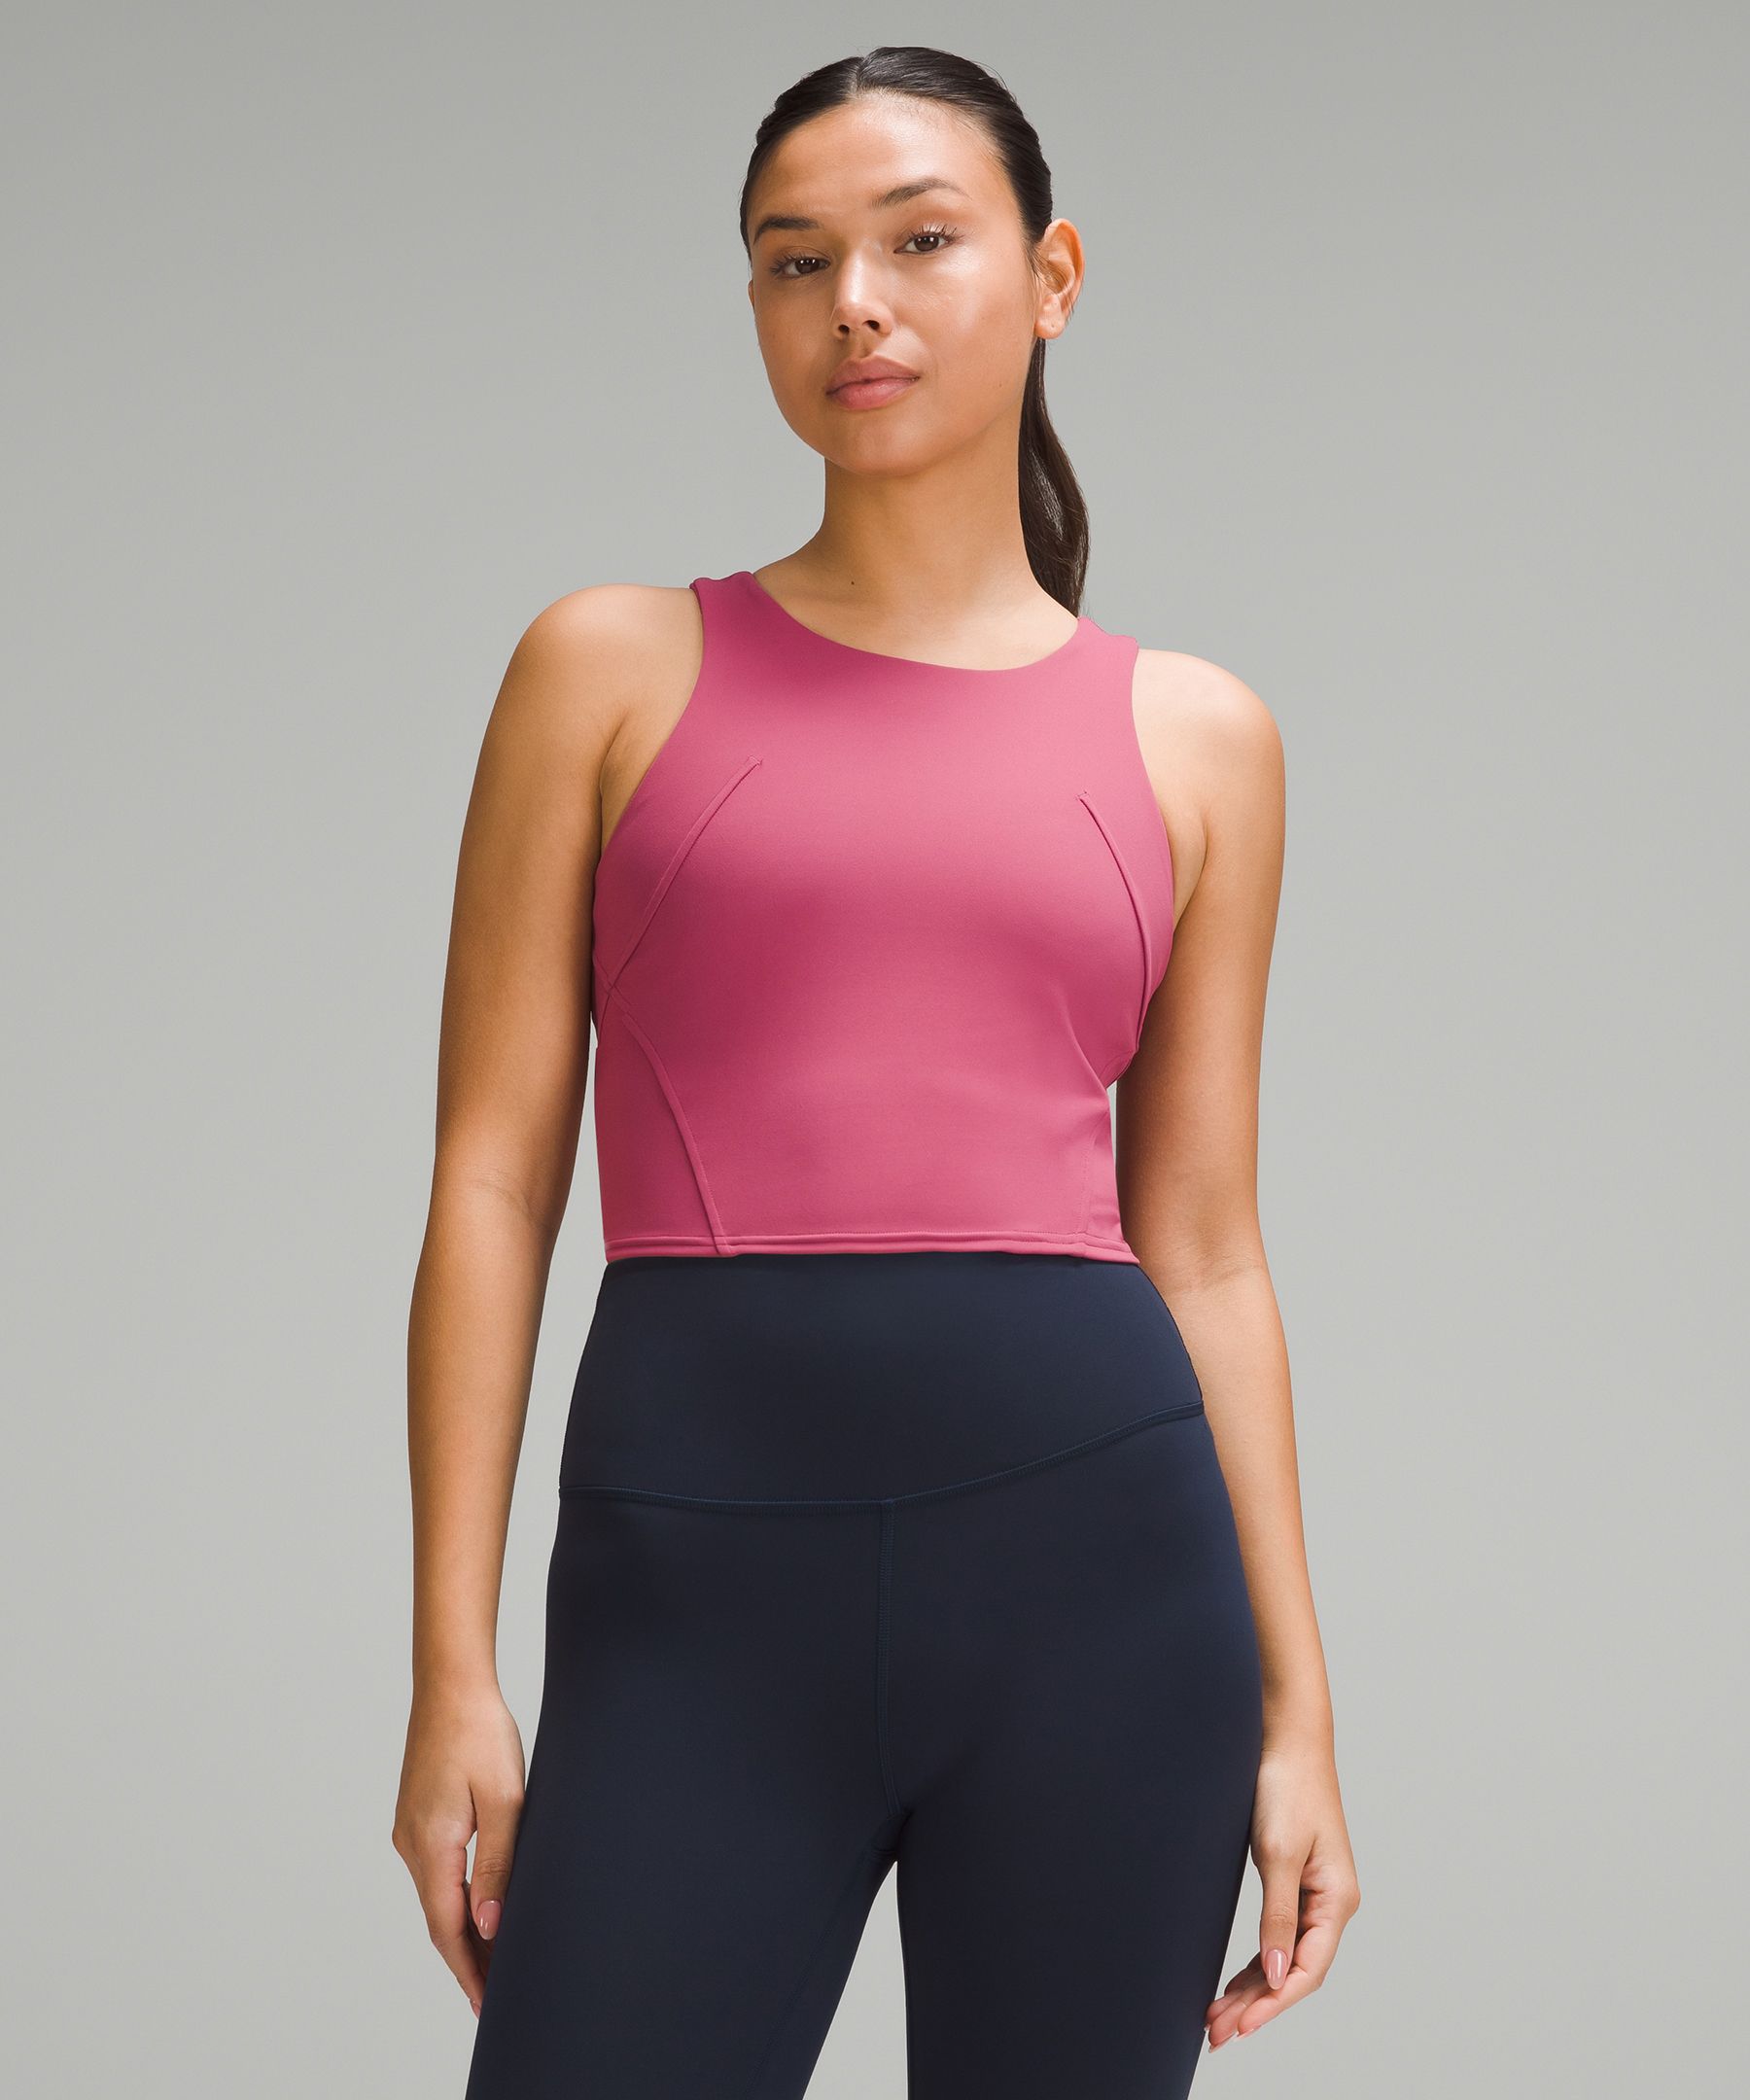 fit check - red merlot wunder trains, black high neck swiftly racerback  race length & an unseen grey sage energy bra (all size 10) : r/lululemon